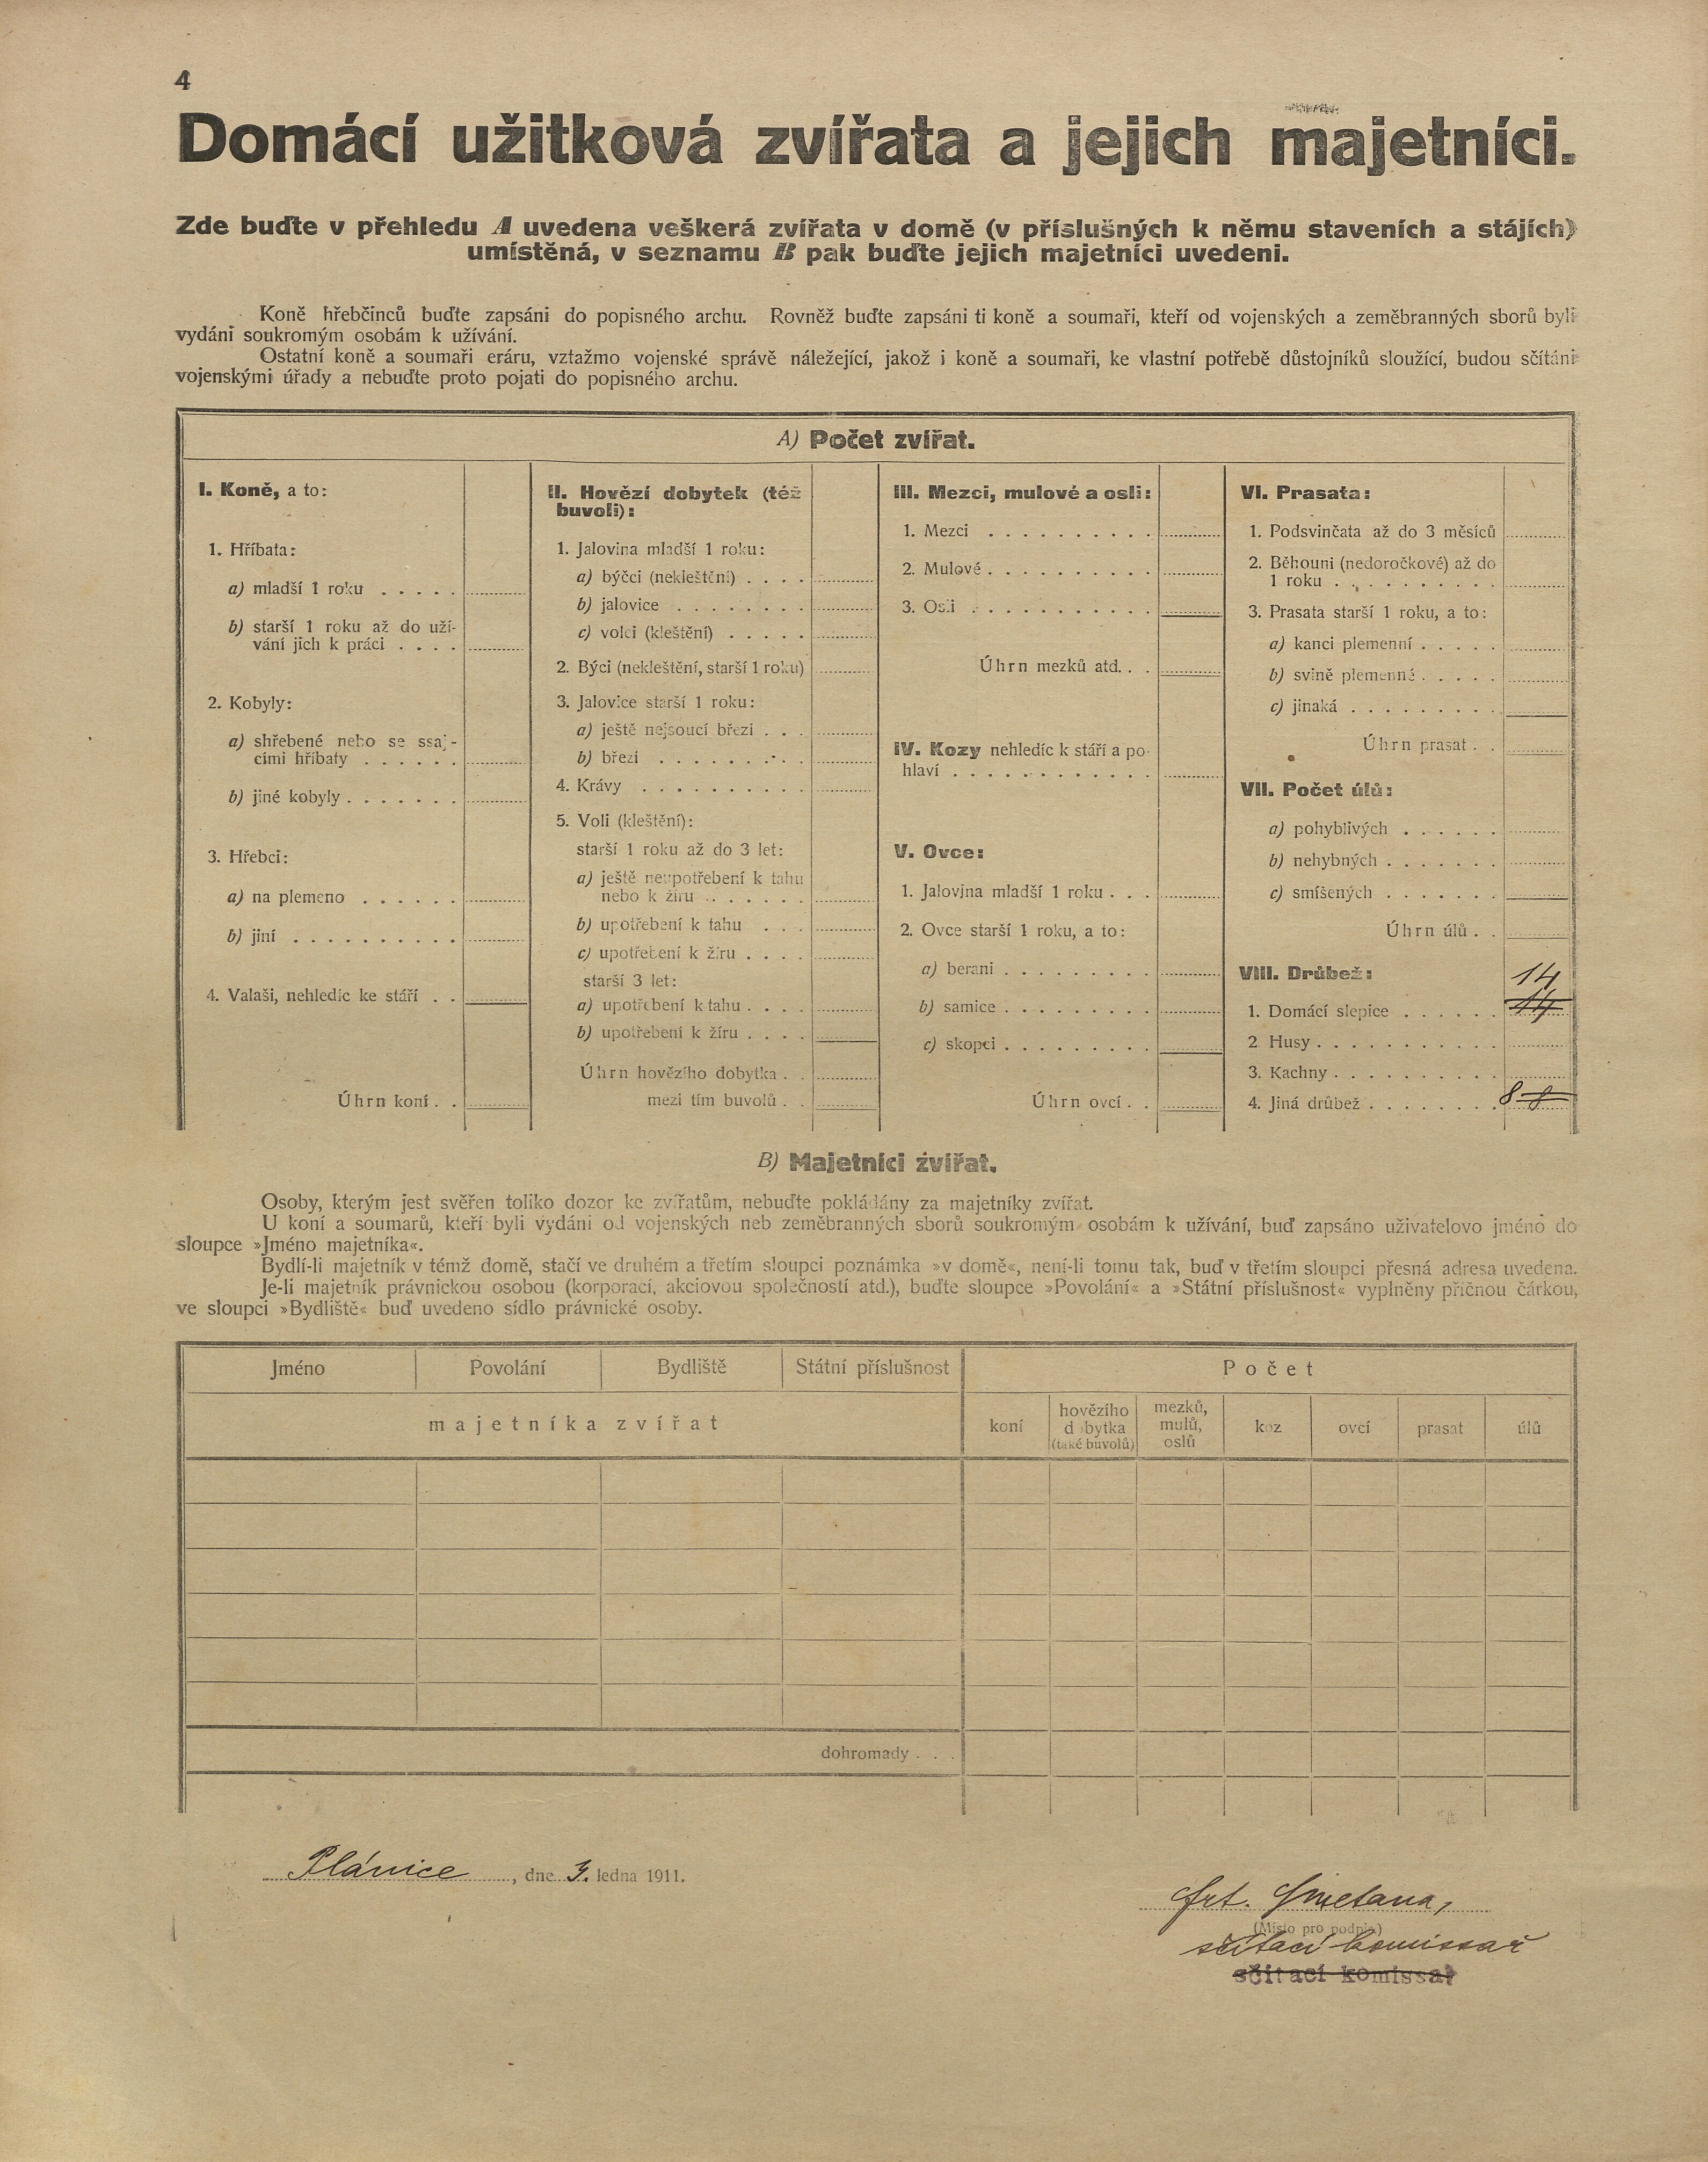 3. soap-kt_01159_census-1910-planice-cp021_0030